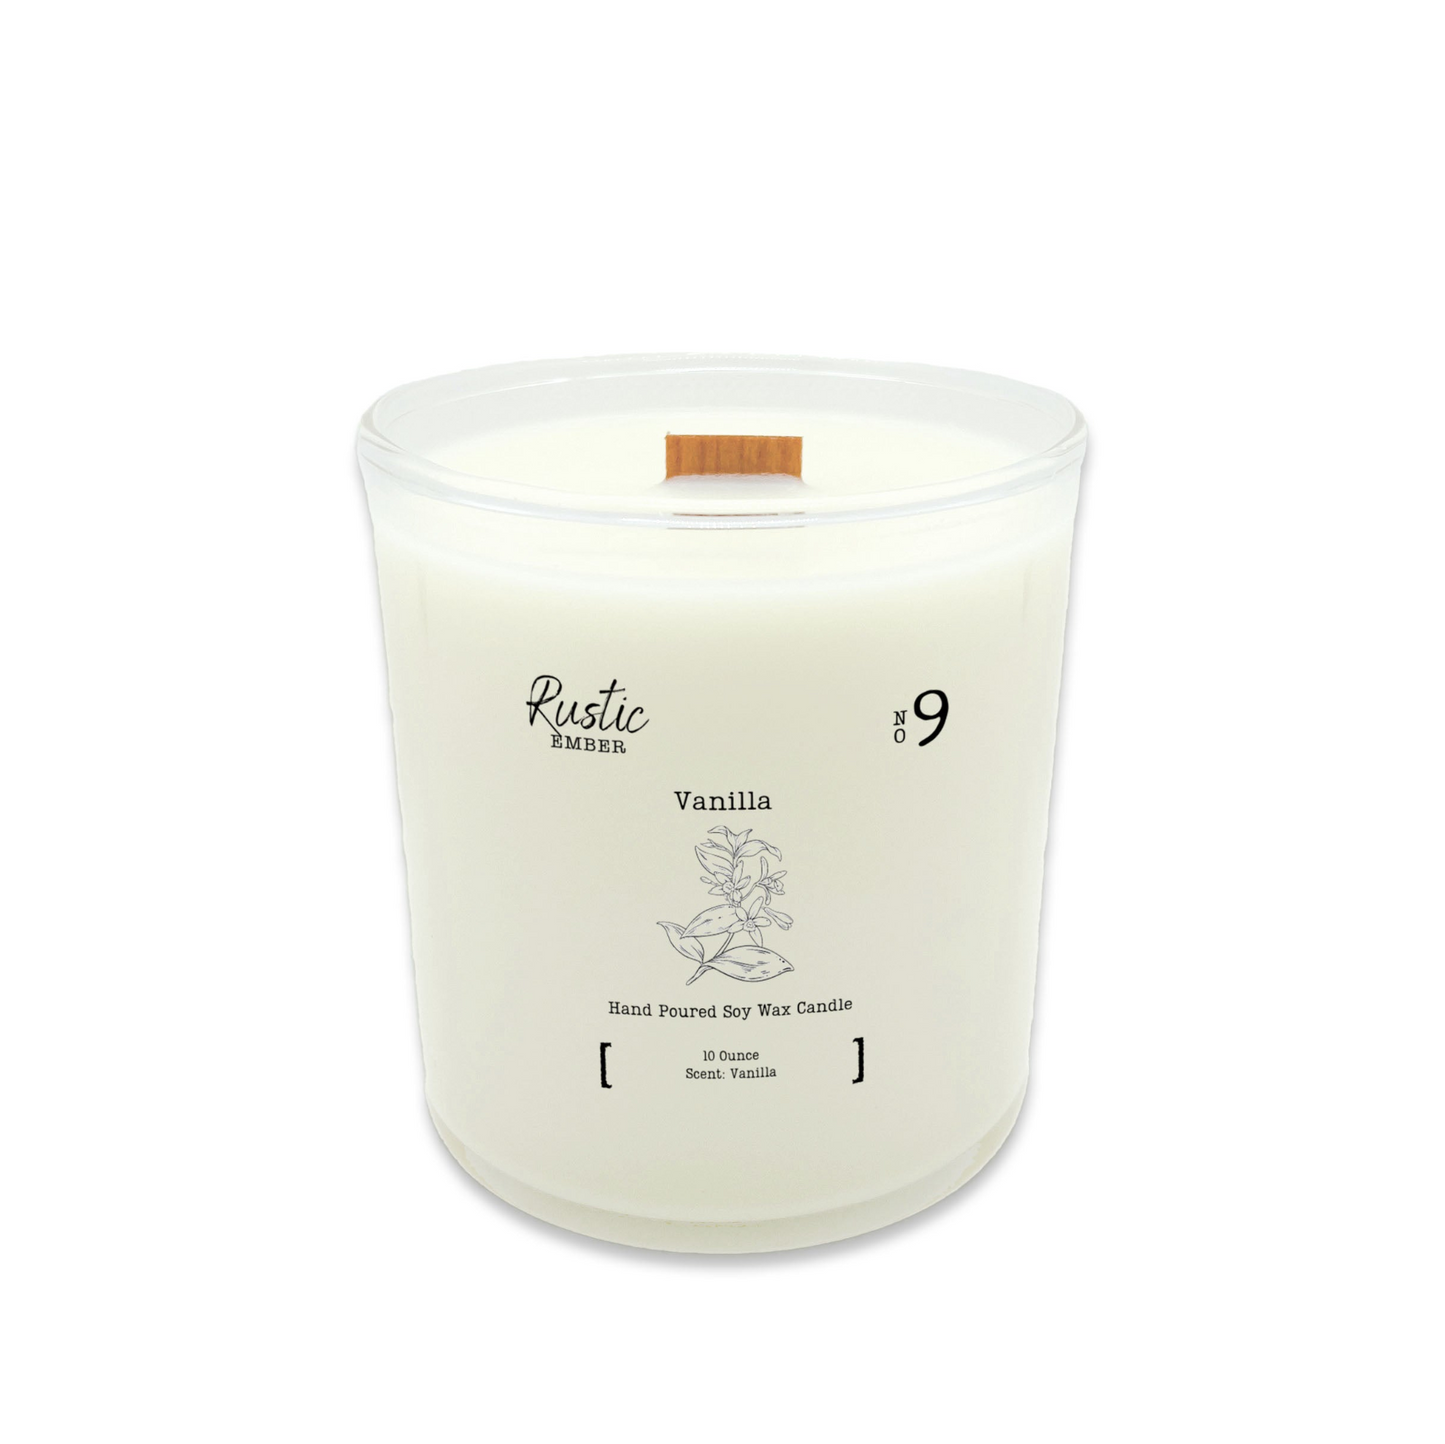 Rustic Ember | Vanilla | 10 Ounce Candle